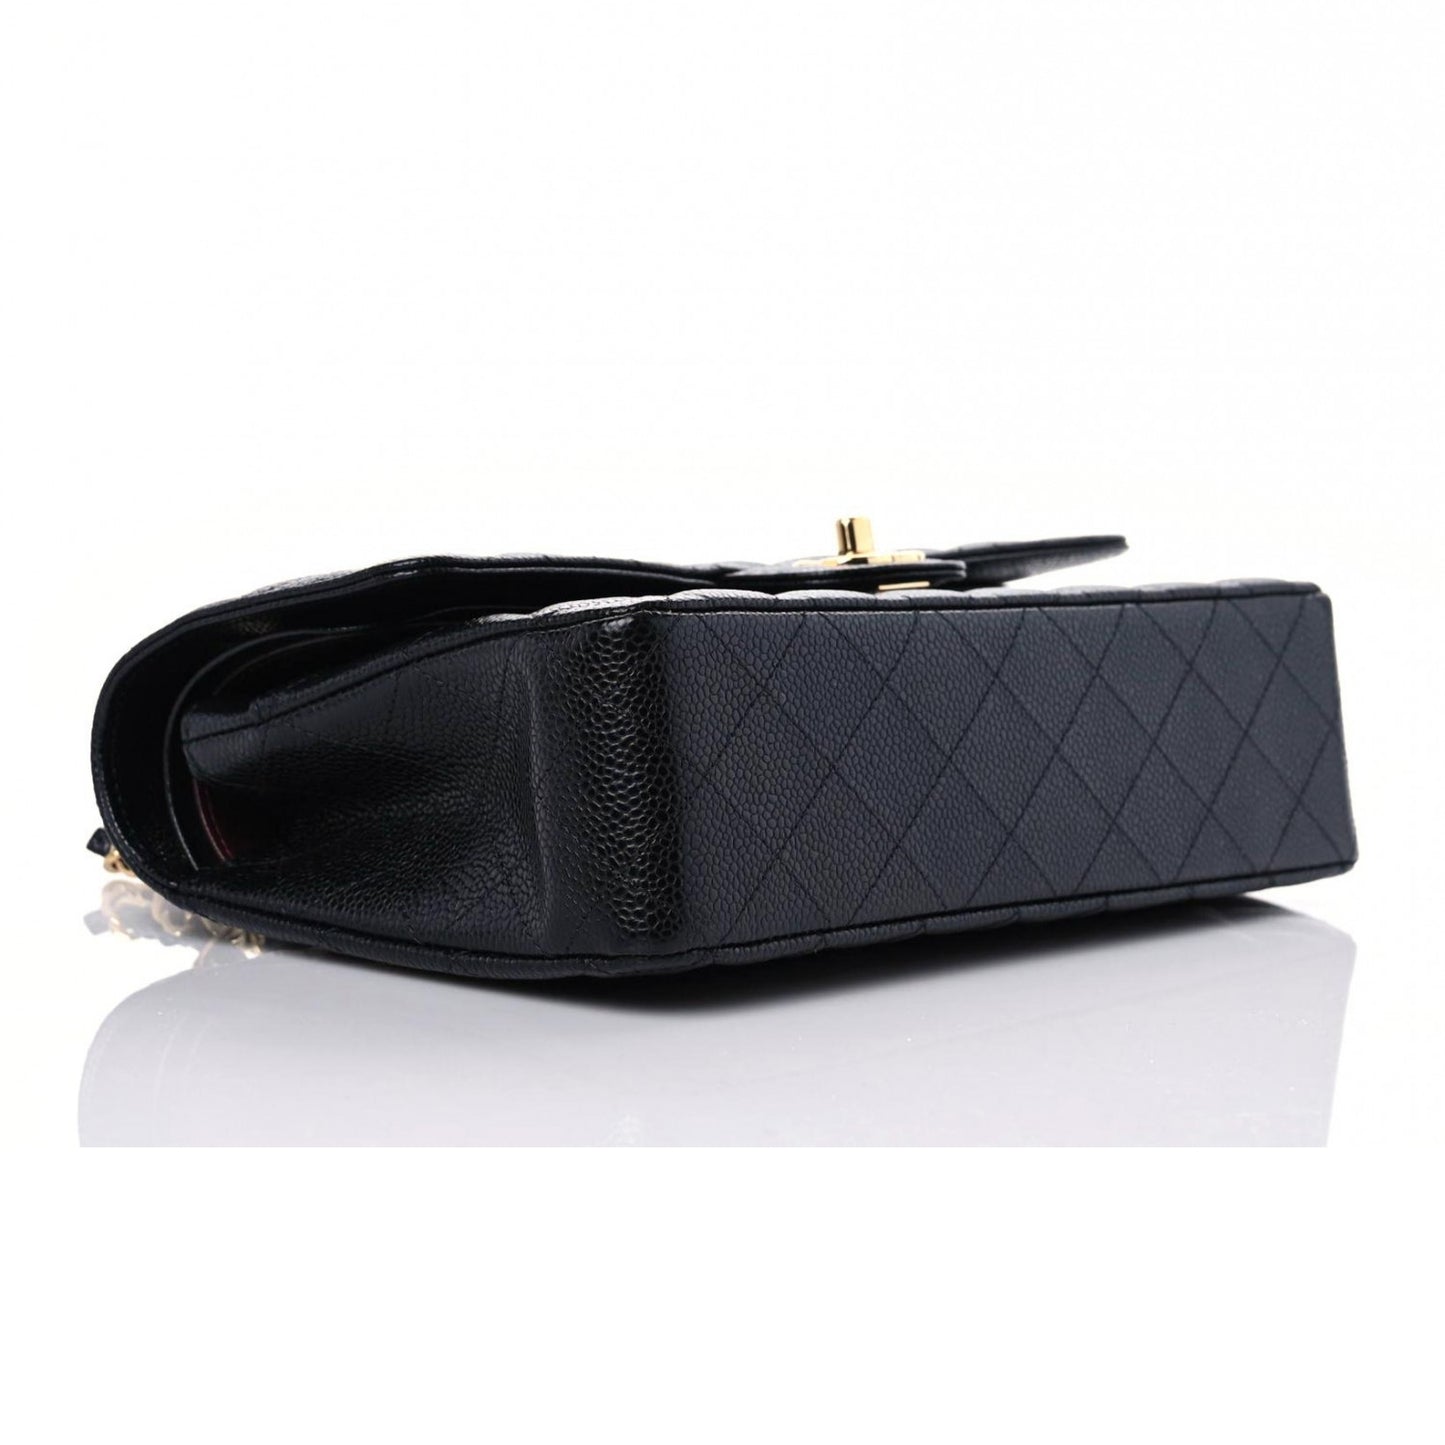 Caviar Quilted Medium Double Flap Black